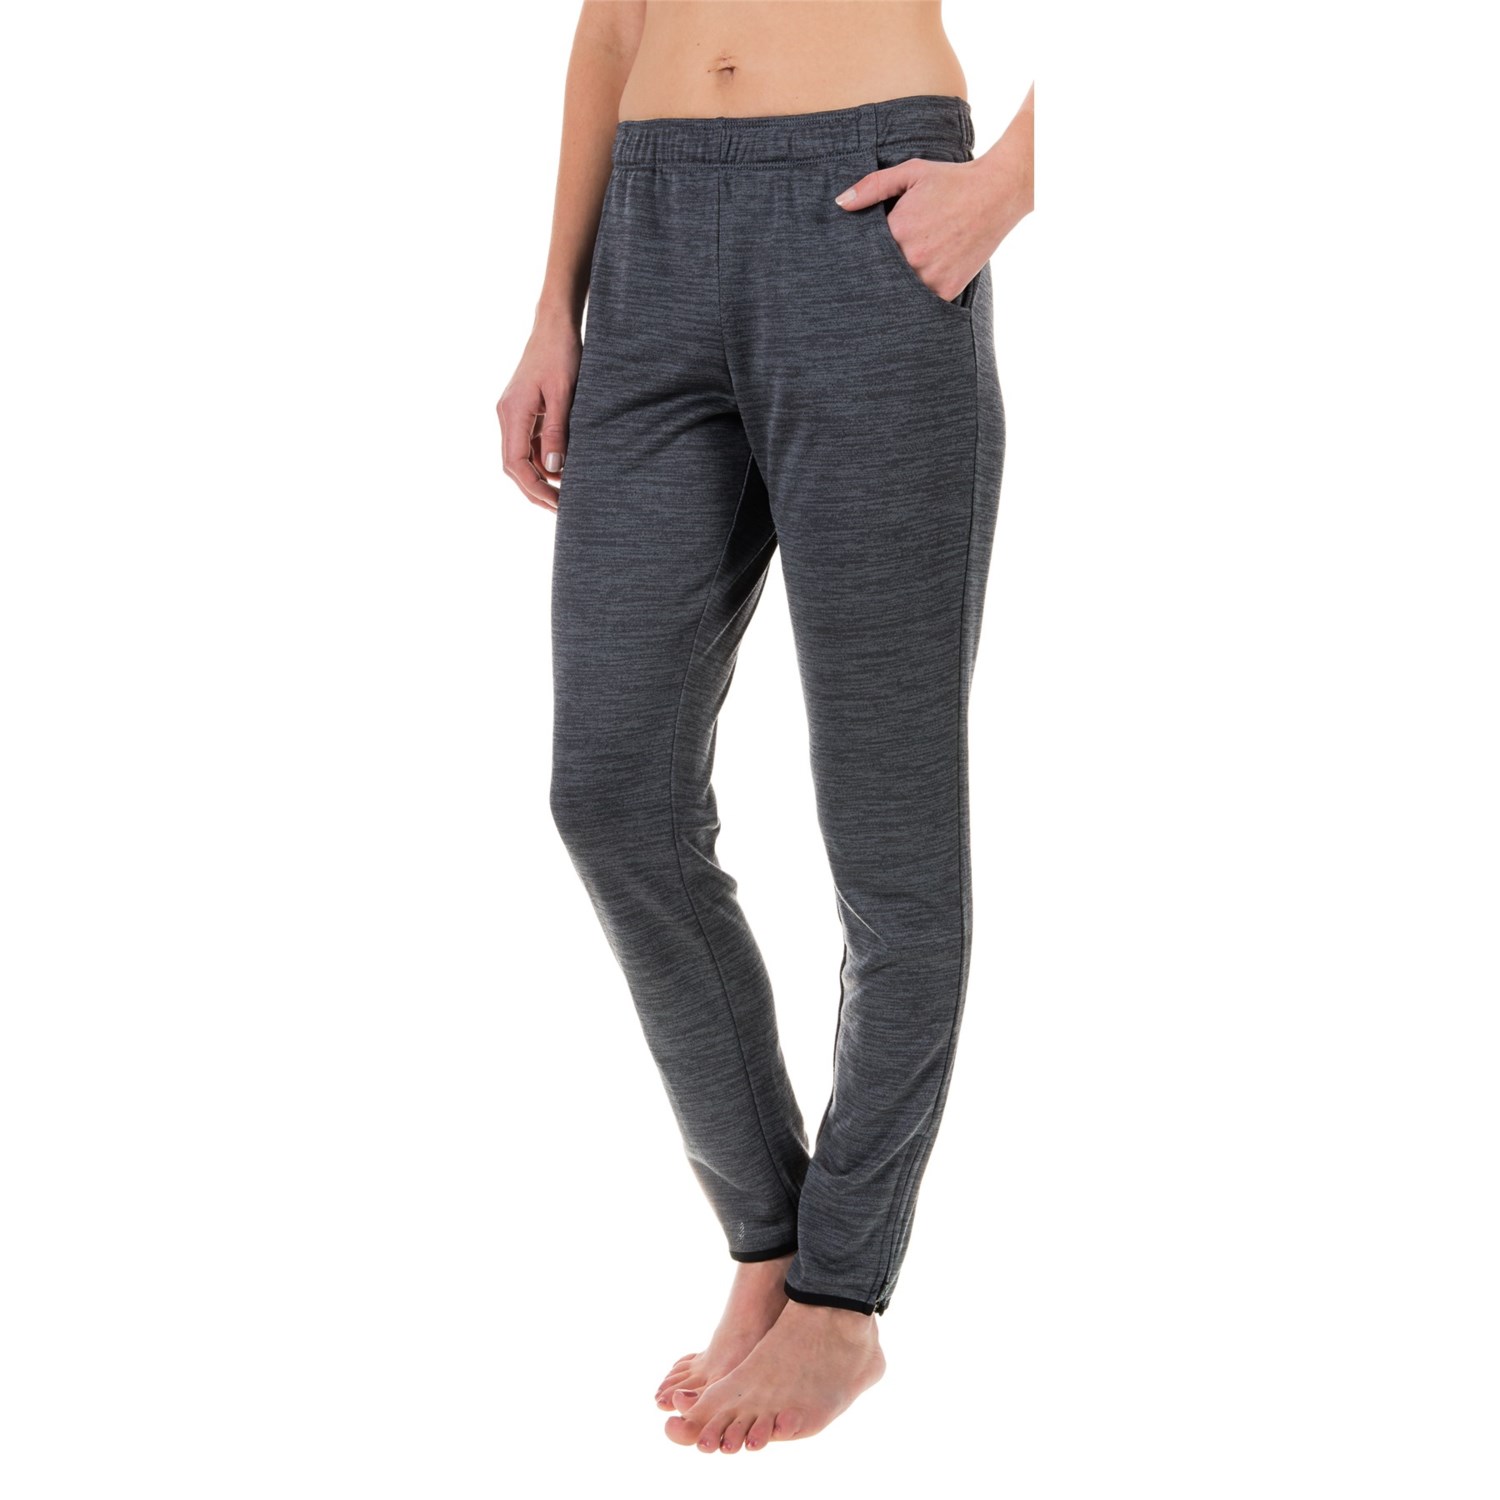 Nicole Miller Zippy Track Pants (For Women) - Save 43%